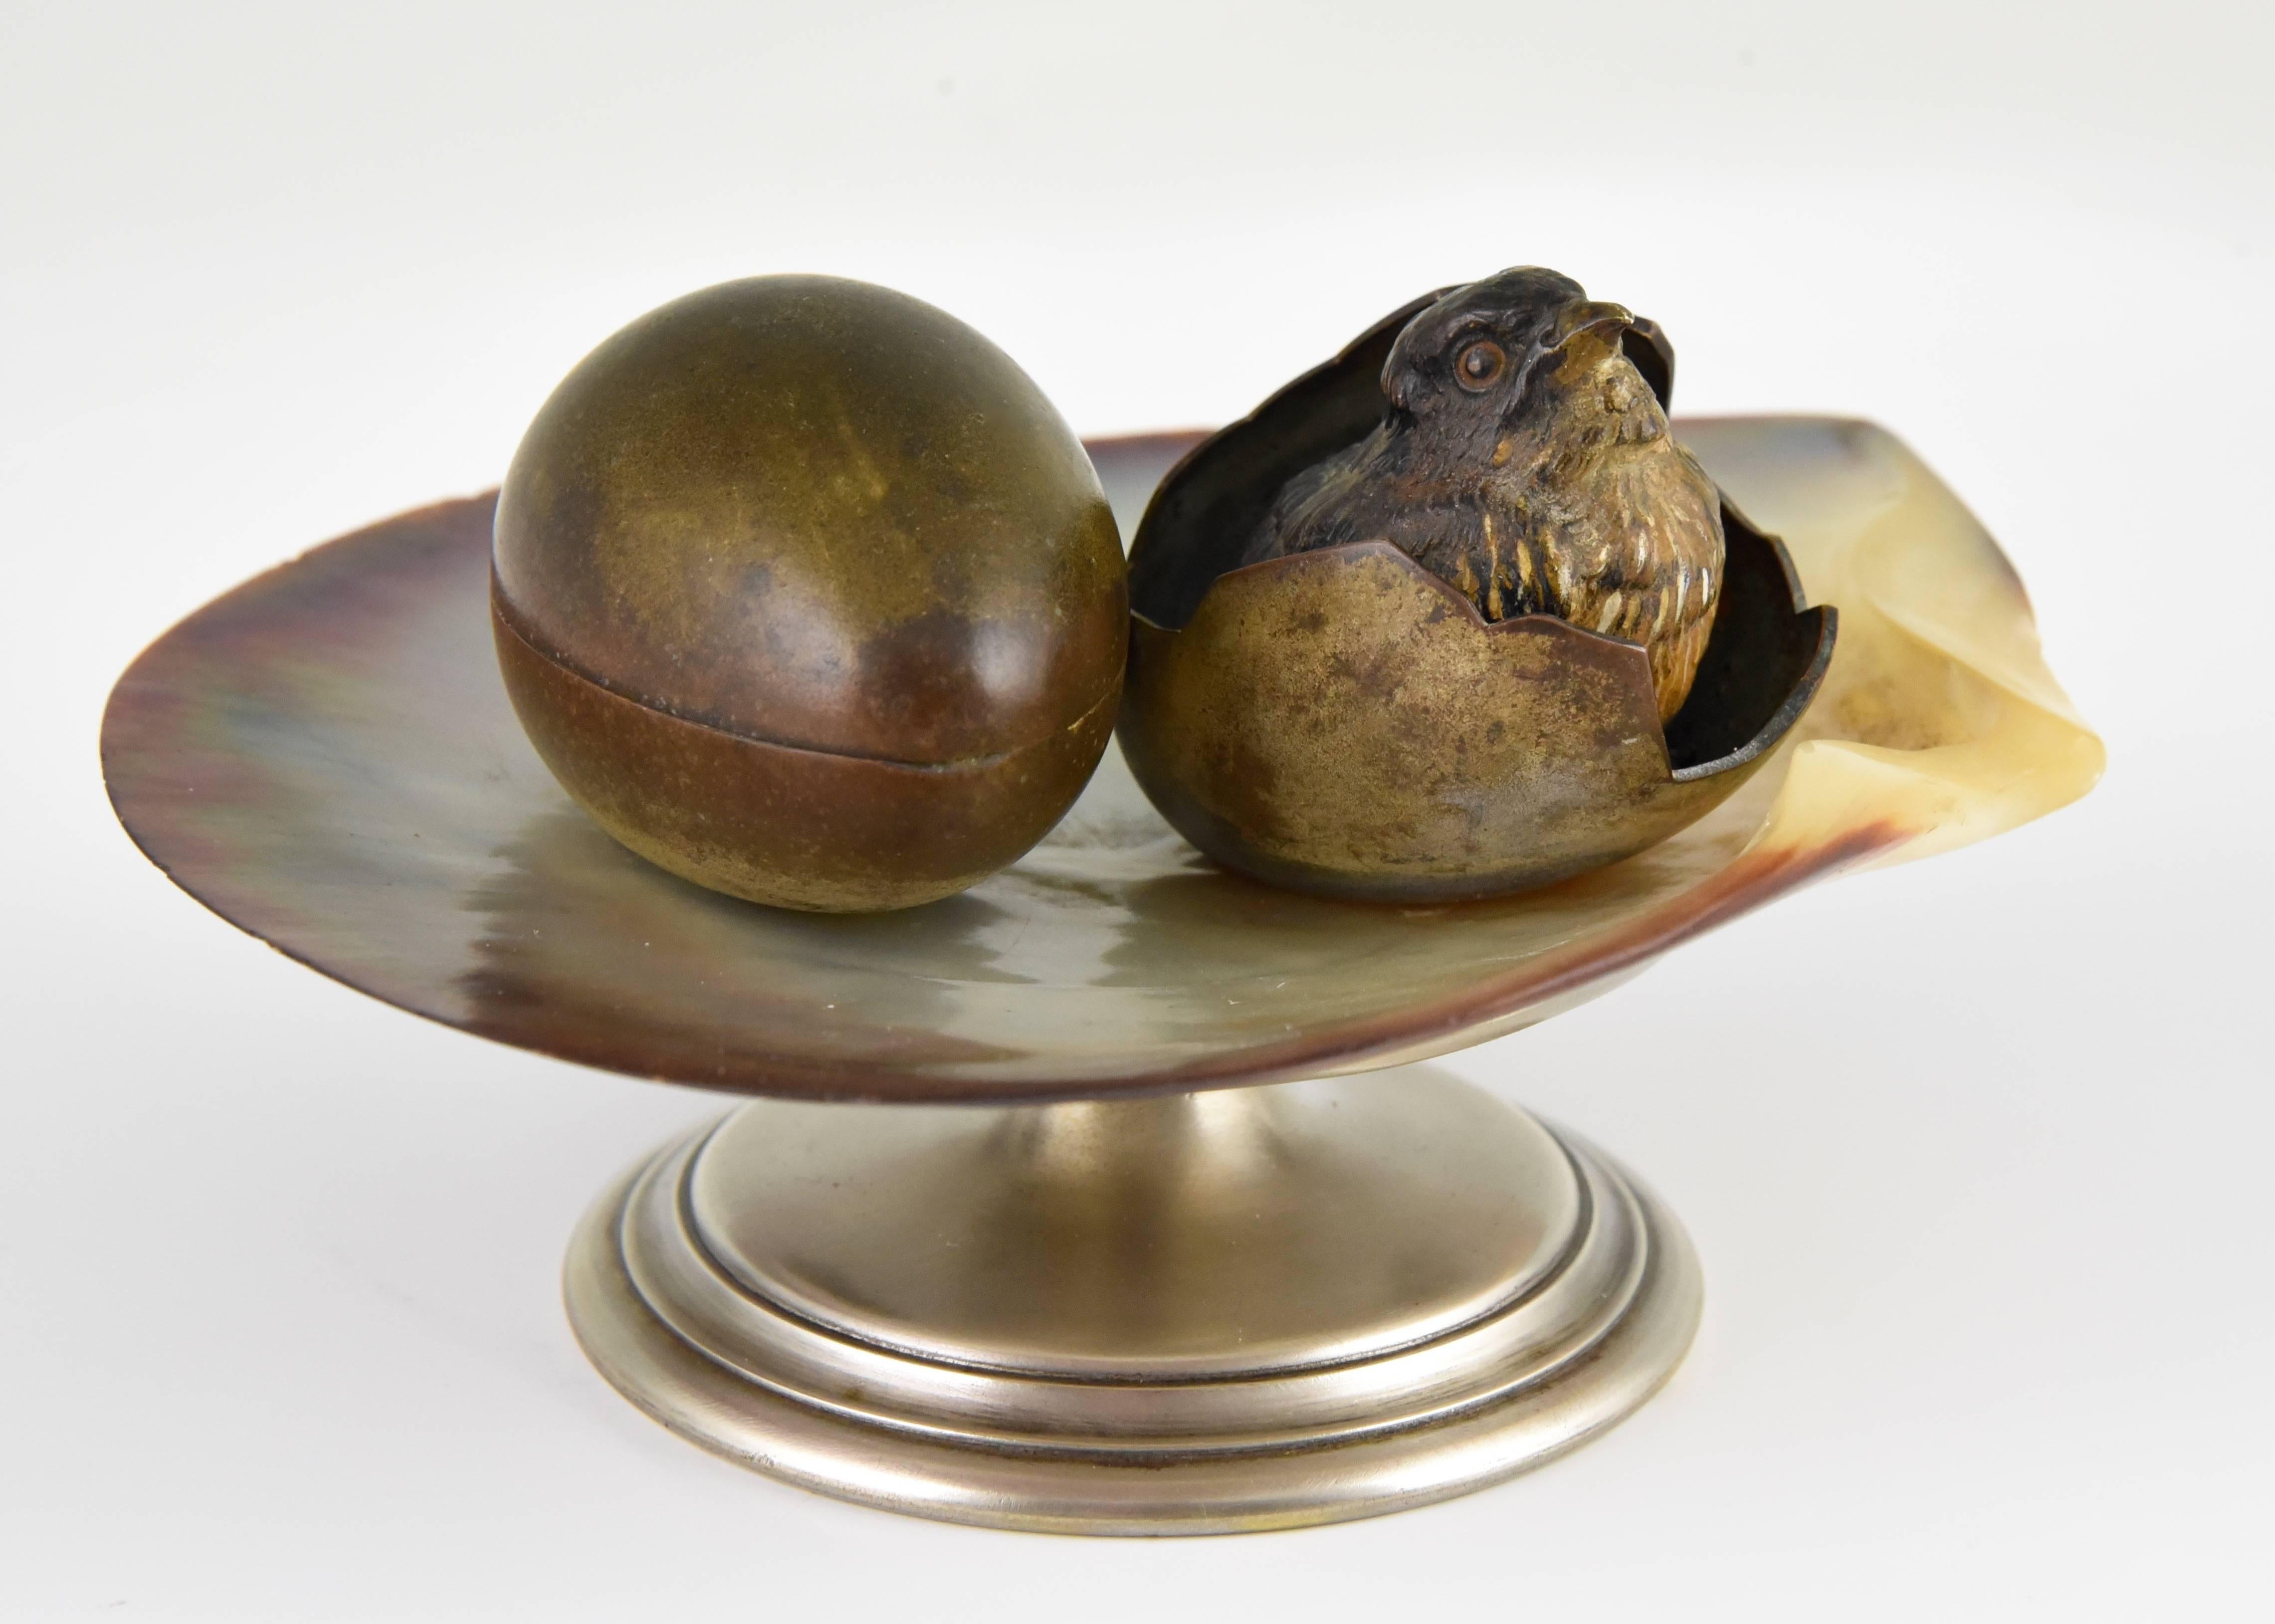 Lovely cold painted Vienna bronze inkwell tray of natural sea shell with young bird in egg shell. The other egg can be opened.
Marked: Geschutzt.
Date: 1900.
Material: Cold painted and silvered bronze, natural seashell.
Origin: Vienna,